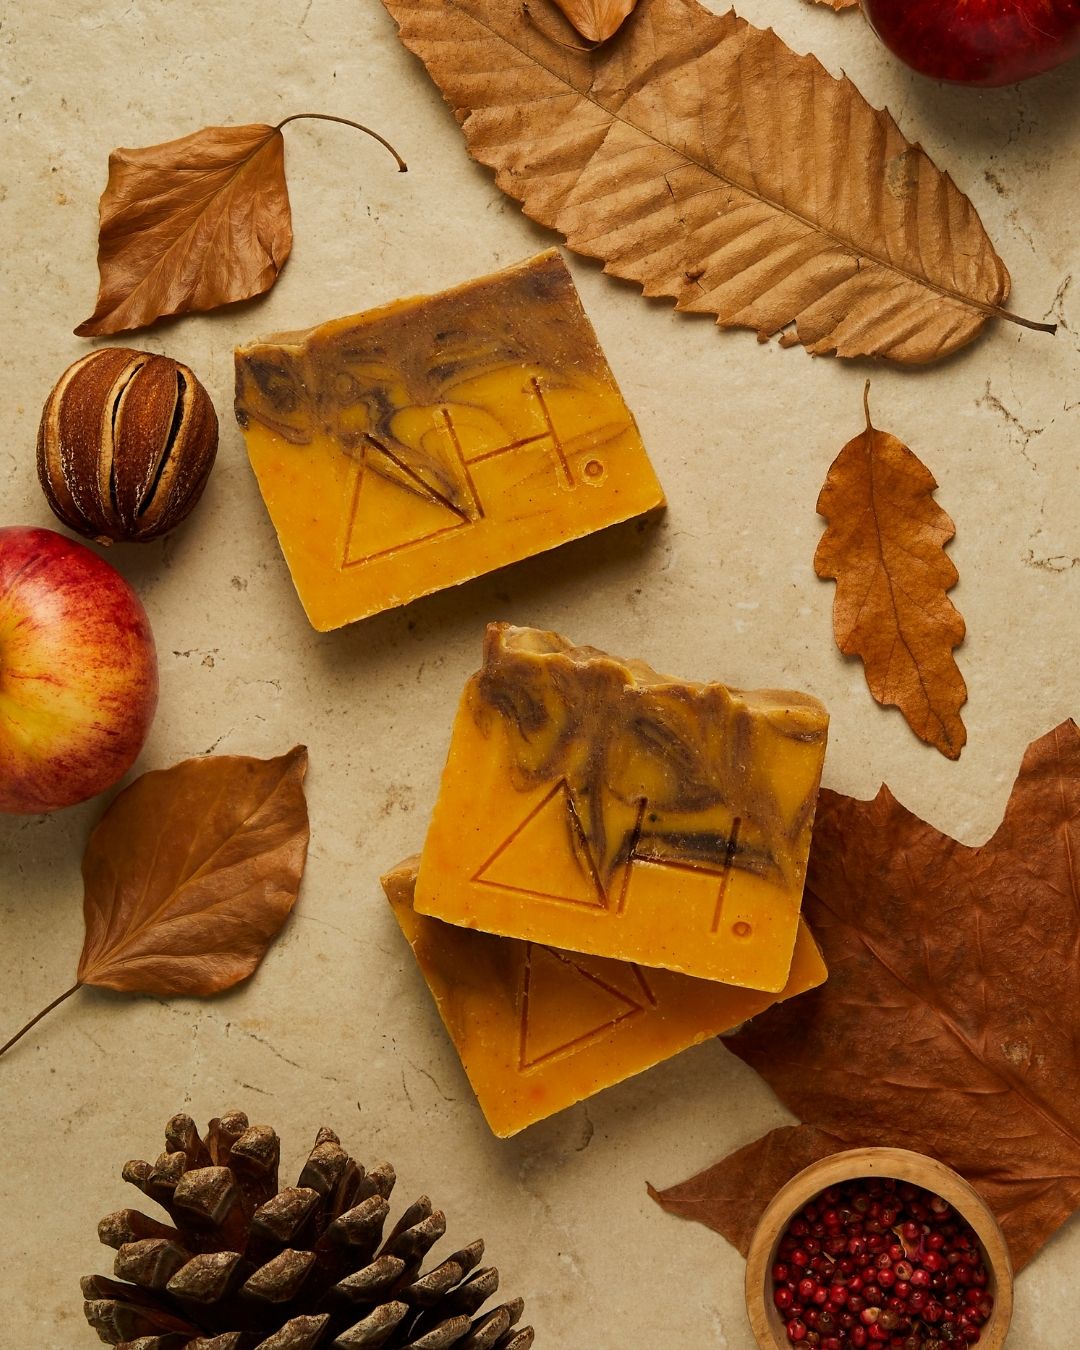 Spiced orange soaps with leaves and apples